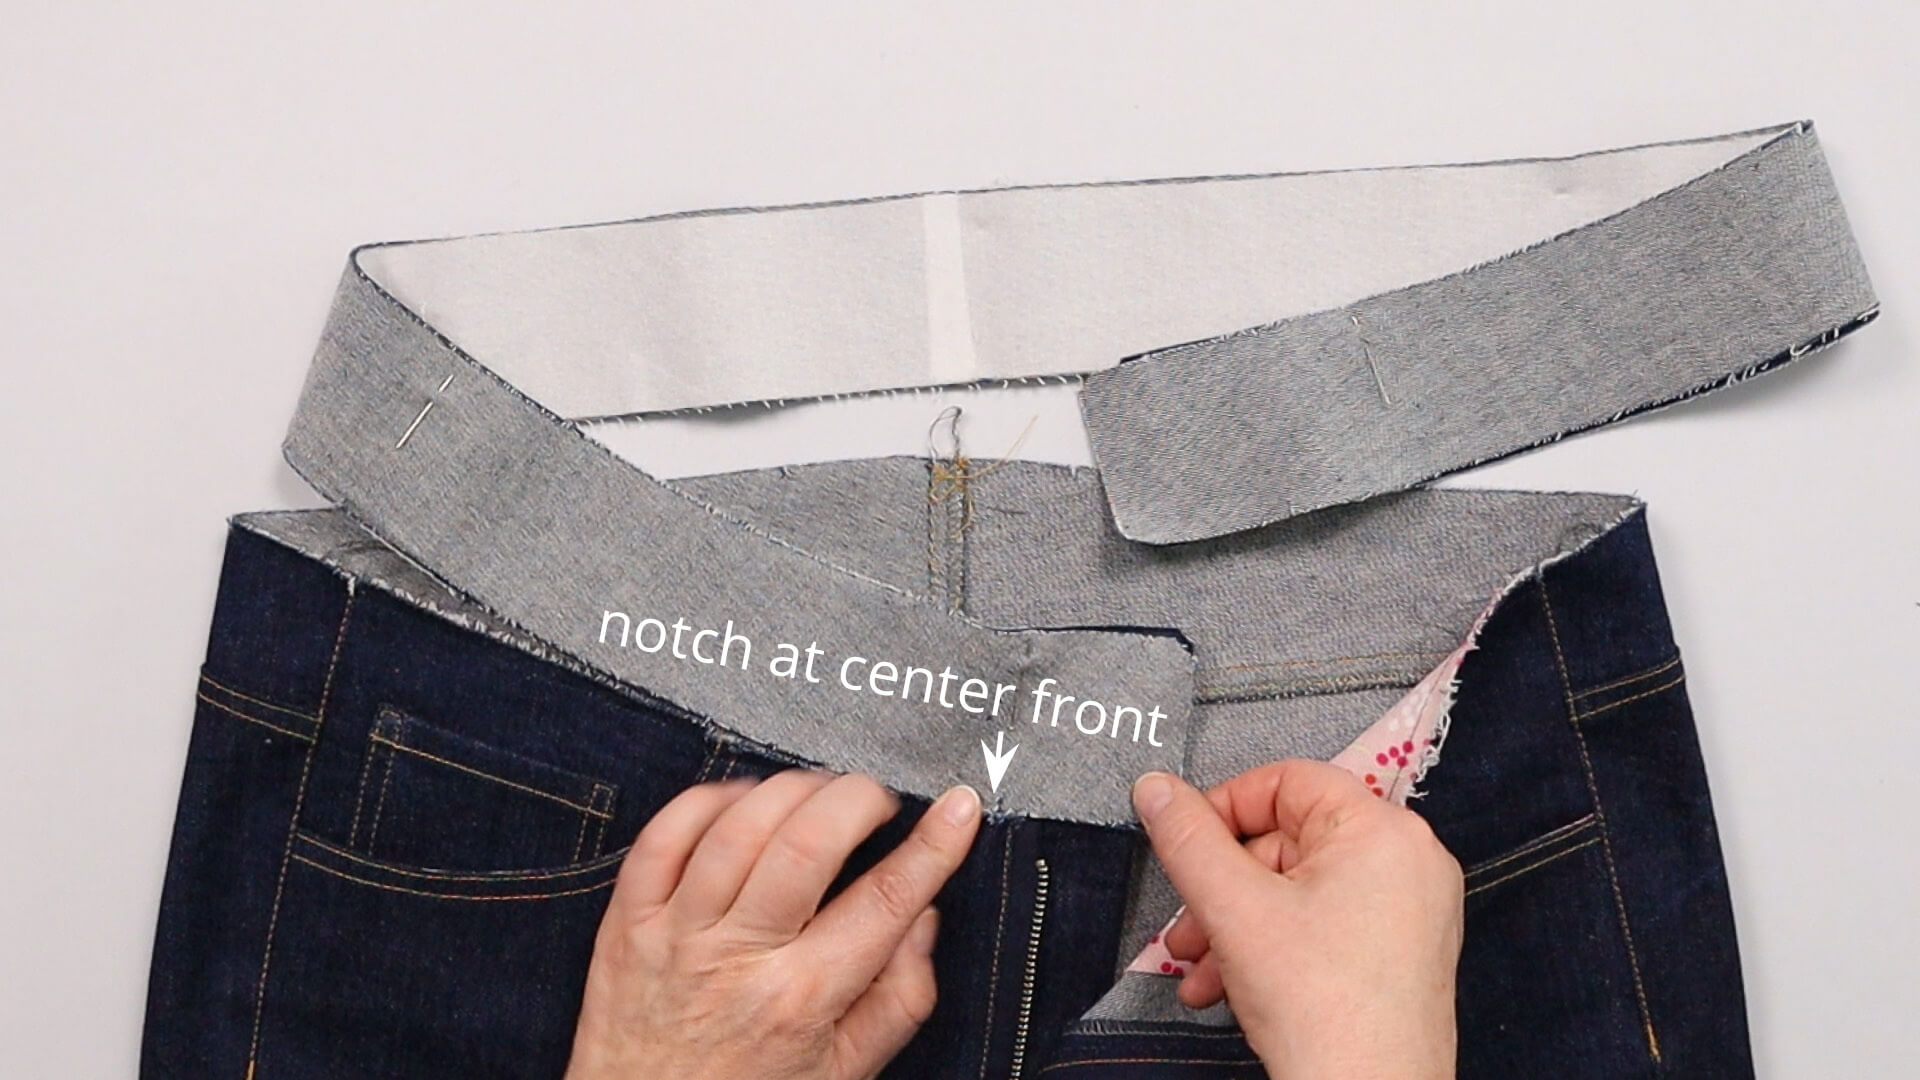 smartPATTERN sewing instructions for sewing attached waistband to denim trousers - attaching the waistband to the right front with underlap